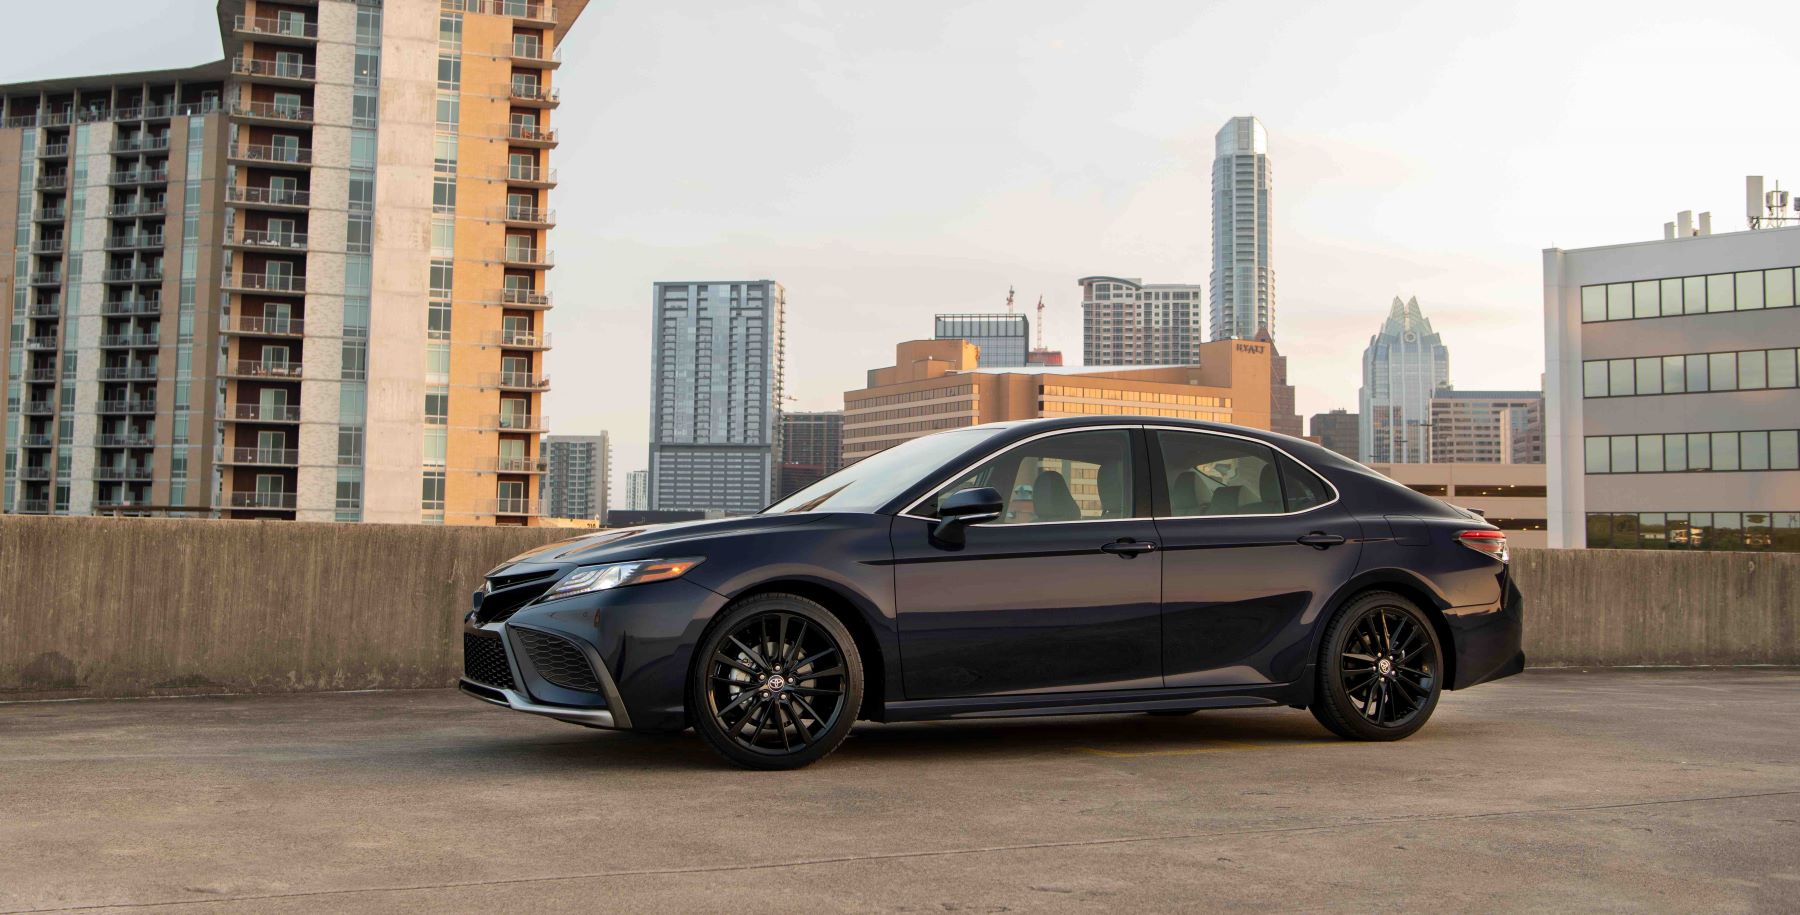 A 2022 Toyota Camry XSE midsize sedan with a black paint color option parked on the top of a roof with a skyline of skyscrapers in the background